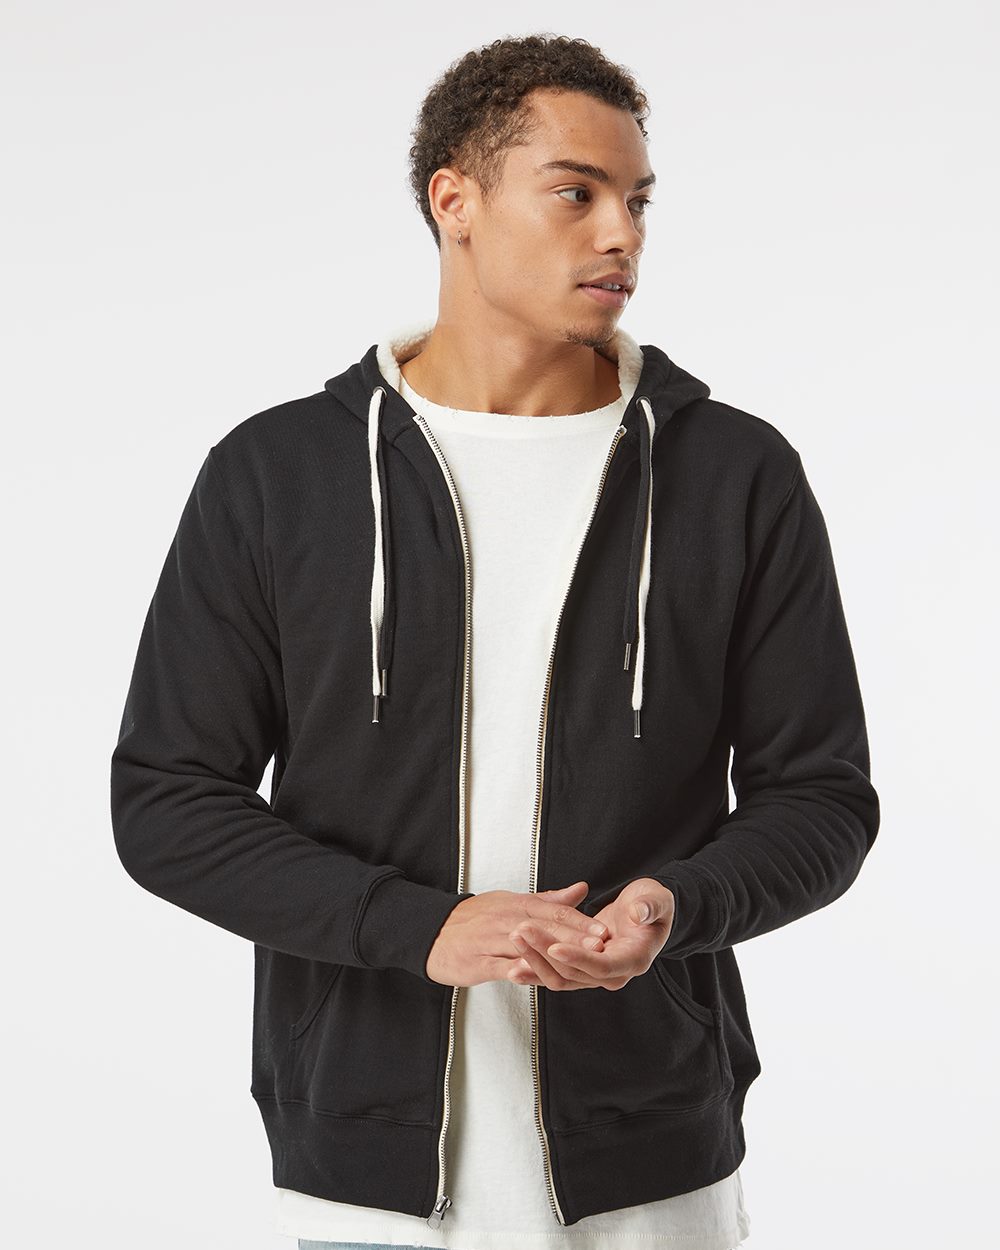 [NEW] Independent Trading Co. Sherpa-Lined Hooded Sweatshirt